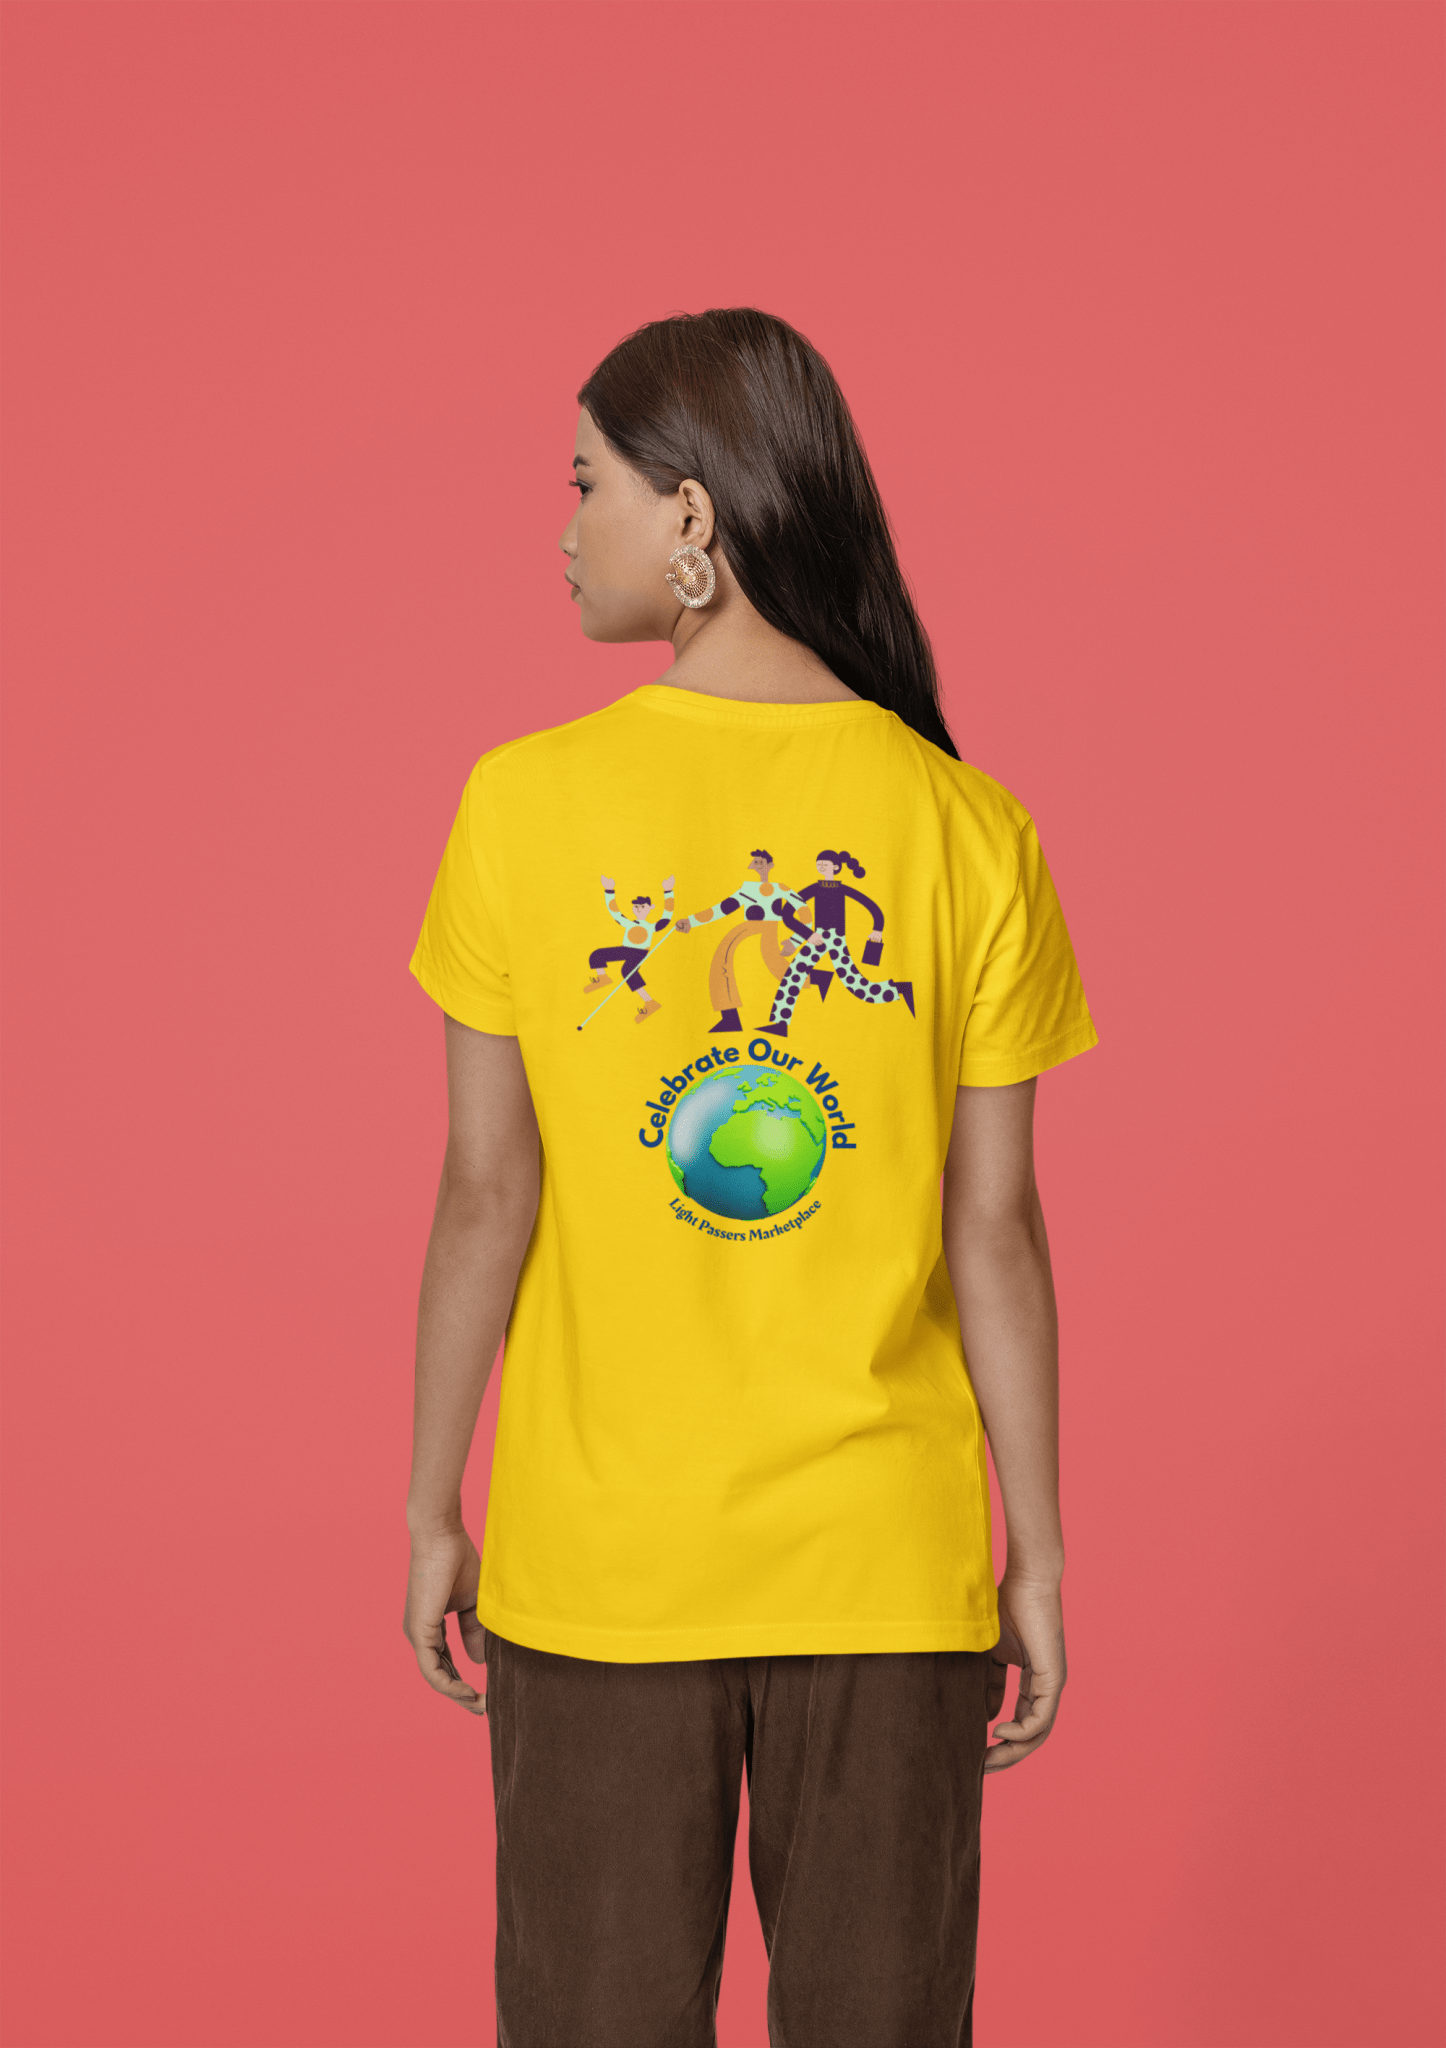 A person in a yellow unisex t-shirt with a globe and people graphic. Made of soft 100% cotton, twill tape shoulders, no side seams, and ribbed collar. Ethically sourced and Oeko-Tex certified.